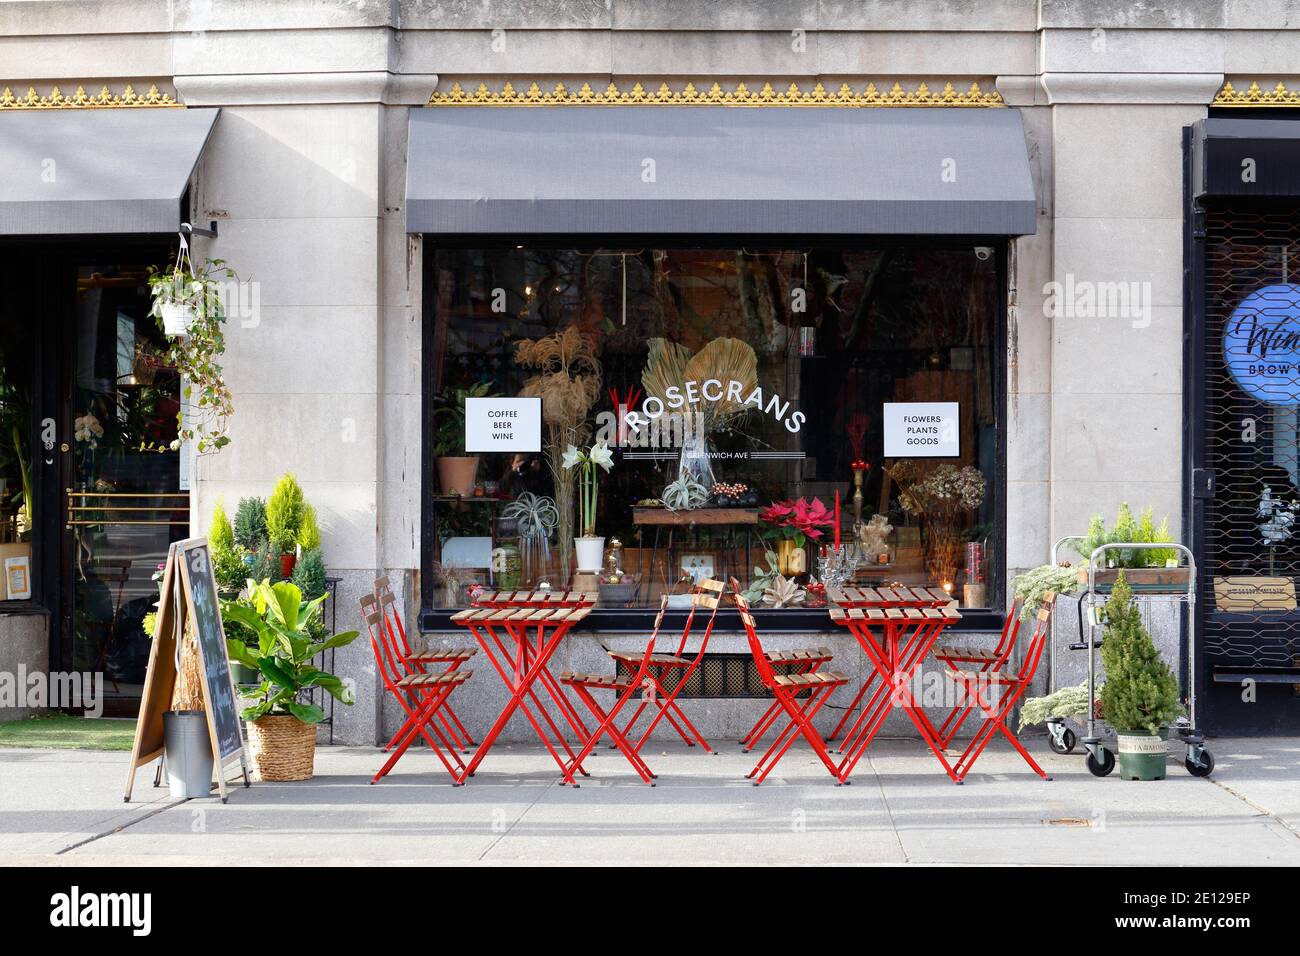 Rosecrans, 7 Greenwich Ave, New York, NYC storefront photo of a flower shop and cafe in the Greenwich Village neighborhood of Manhattan. Stock Photo